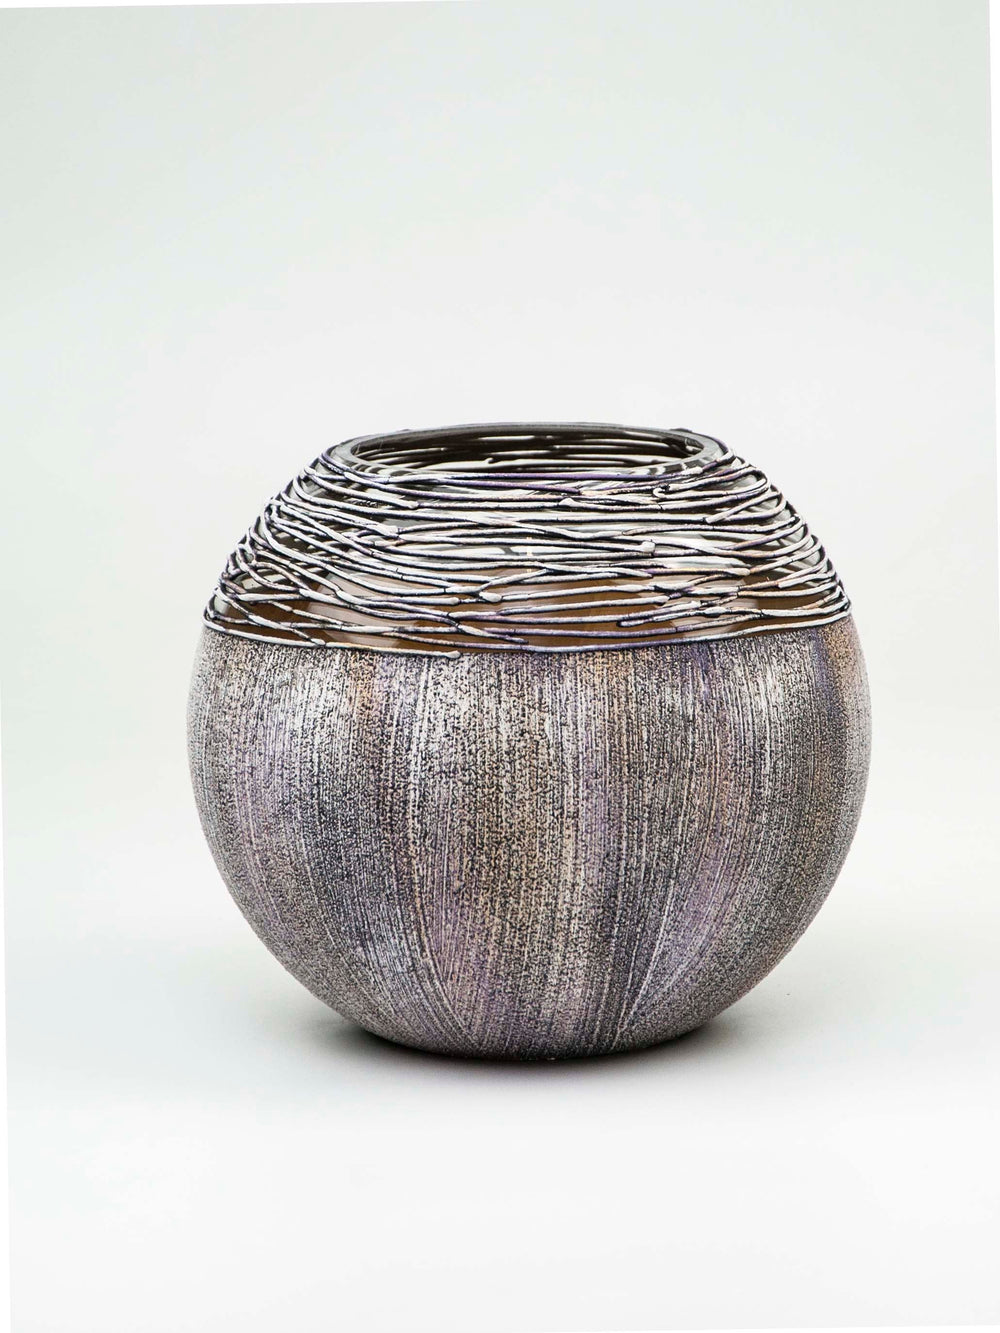 Art Decorated Gray Glass Vase for Flowers | Painted Art Glass Round Vase | Interior Design Home Room Decor | Table vase 6 inch-1